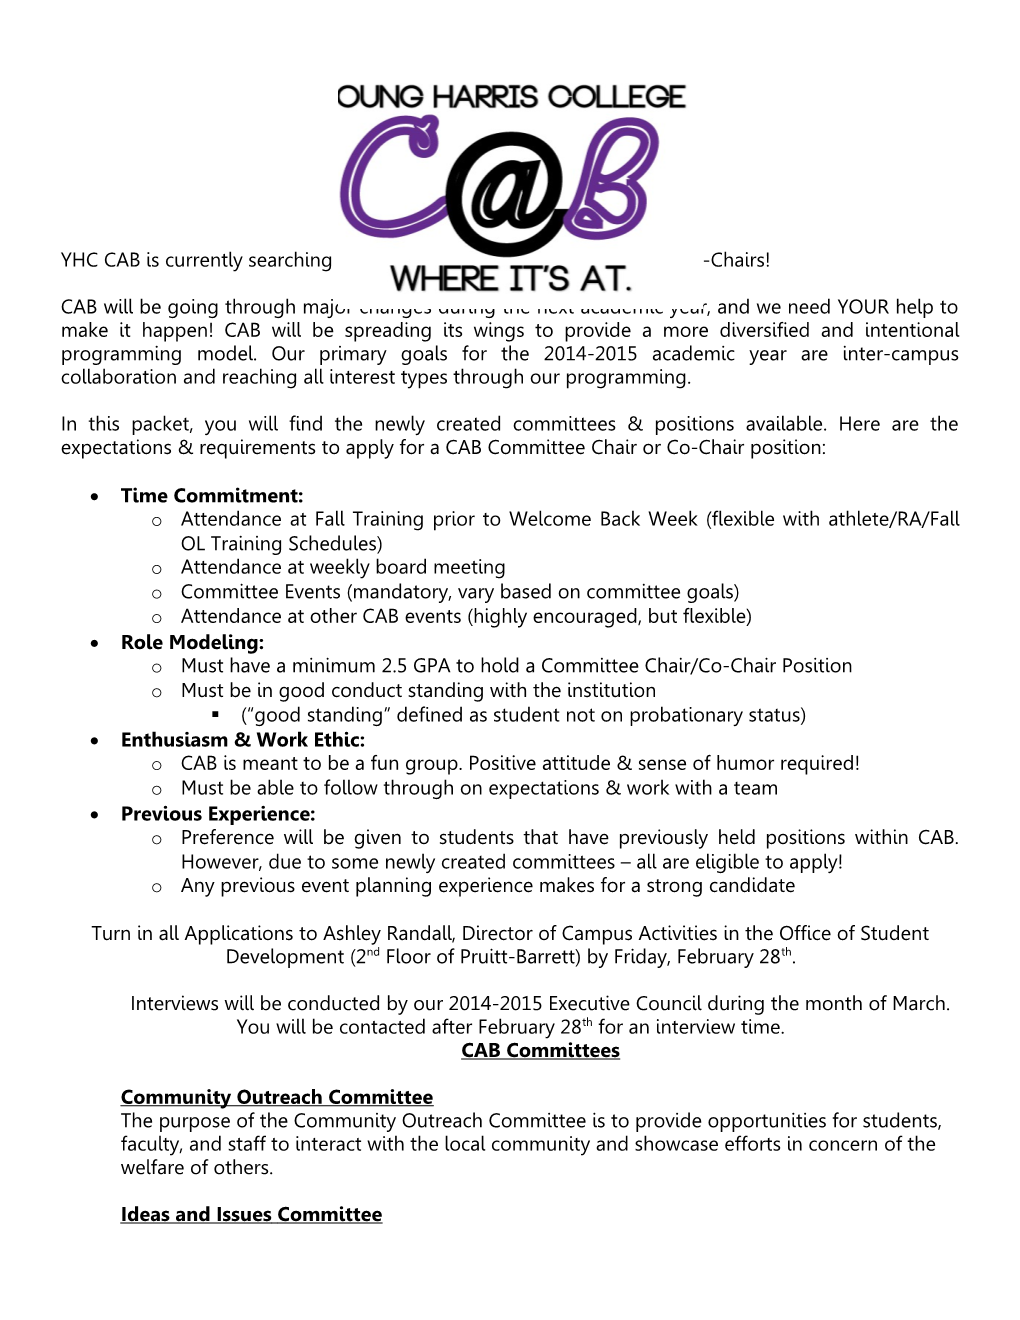 YHC CAB Is Currently Searching for the 2014-2015 Committee Chair & Co-Chairs!